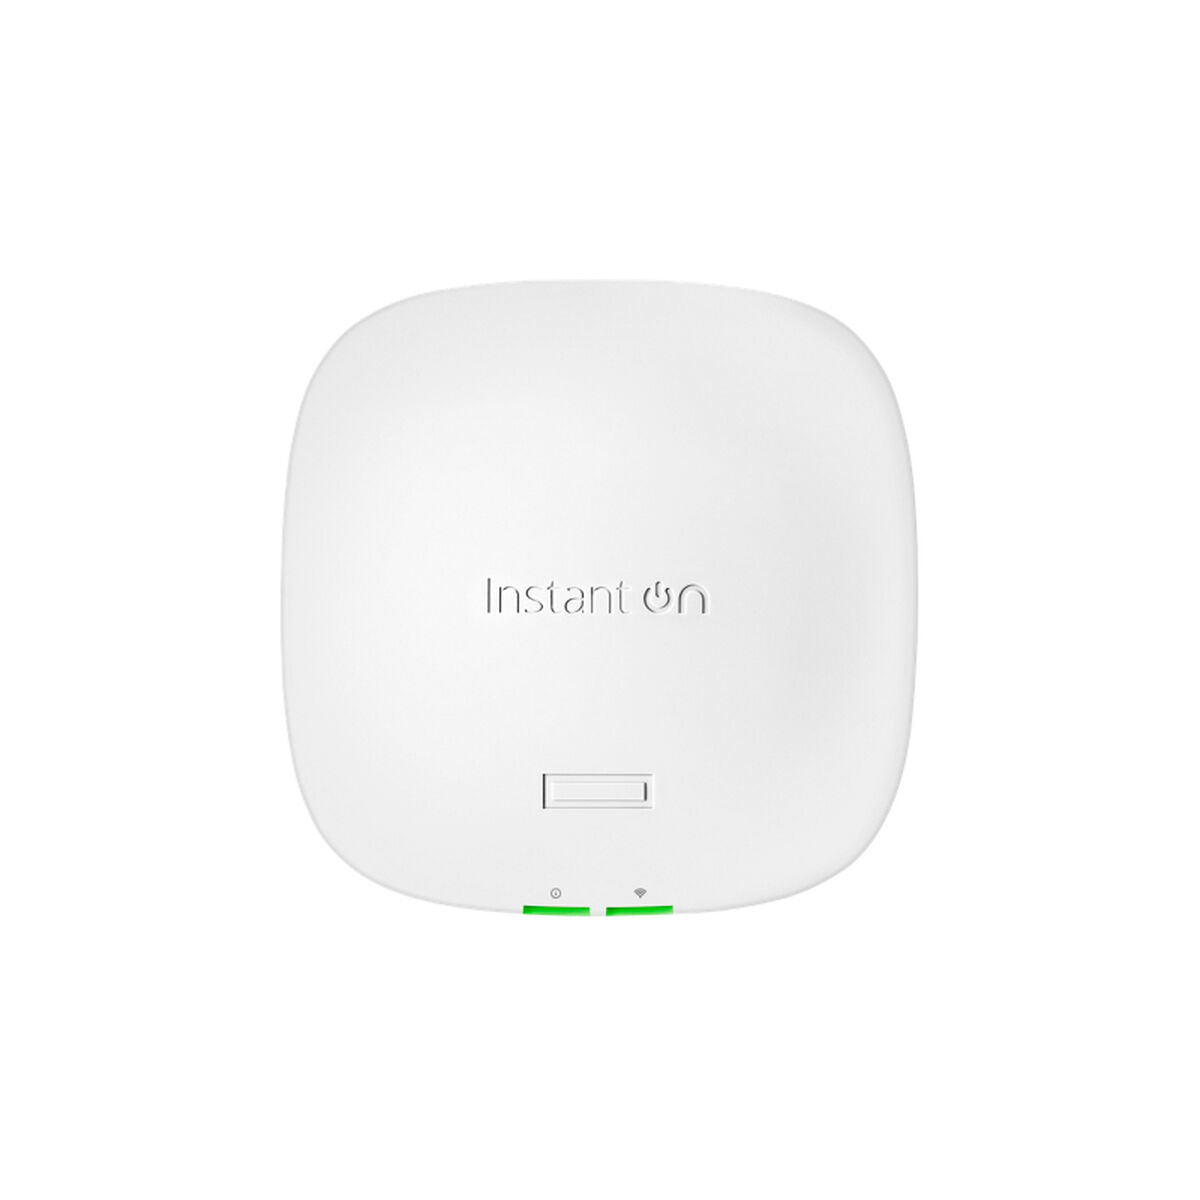 Access point HPE S1T09A White, HPE, Computing, Network devices, access-point-hpe-s1t09a-white-1, Brand_HPE, category-reference-2609, category-reference-2803, category-reference-2820, category-reference-t-19685, category-reference-t-19914, category-reference-t-21369, Condition_NEW, networks/wiring, Price_100 - 200, Teleworking, RiotNook